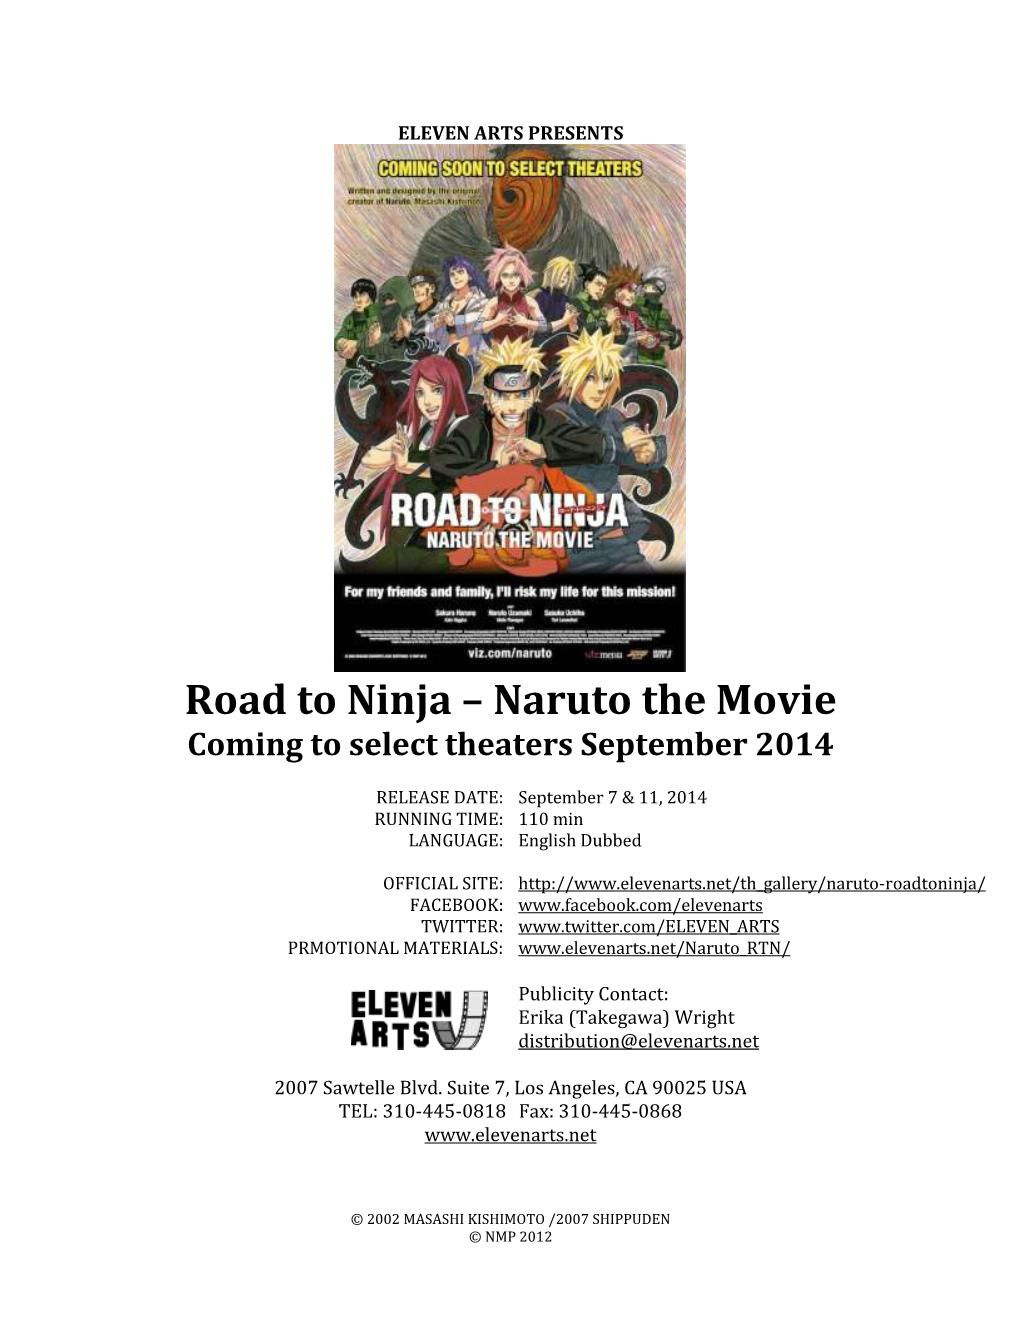 Naruto the Movie Coming to Select Theaters September 2014